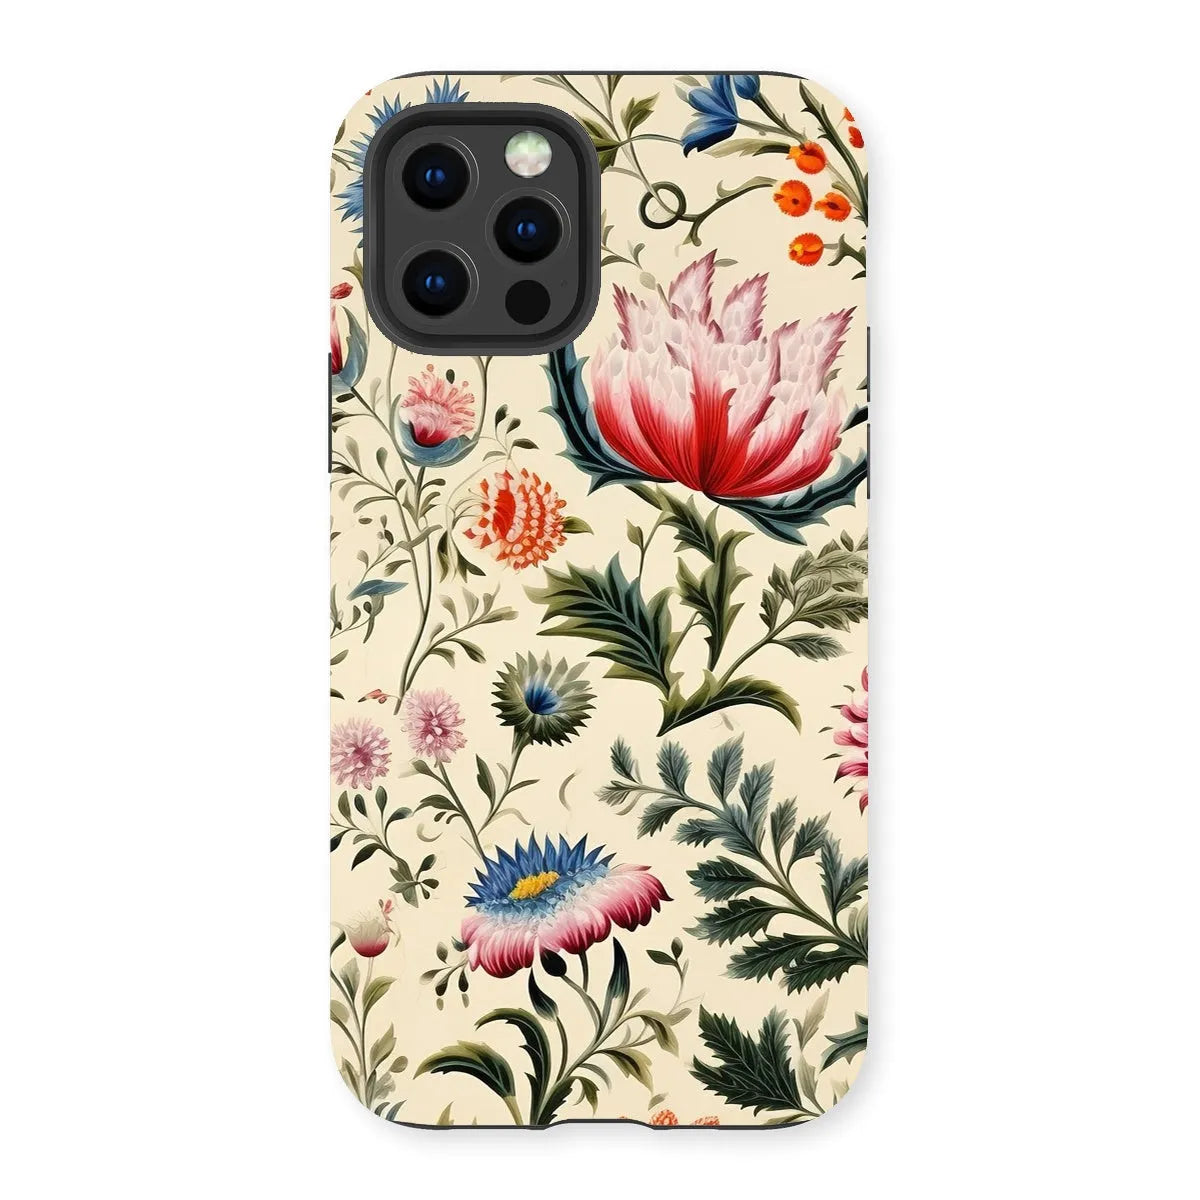 Wildflower Hoopla - Floral Garden Aesthetic Phone Case - Iphone 13 Pro / Matte - Mobile Phone Cases - Aesthetic Art